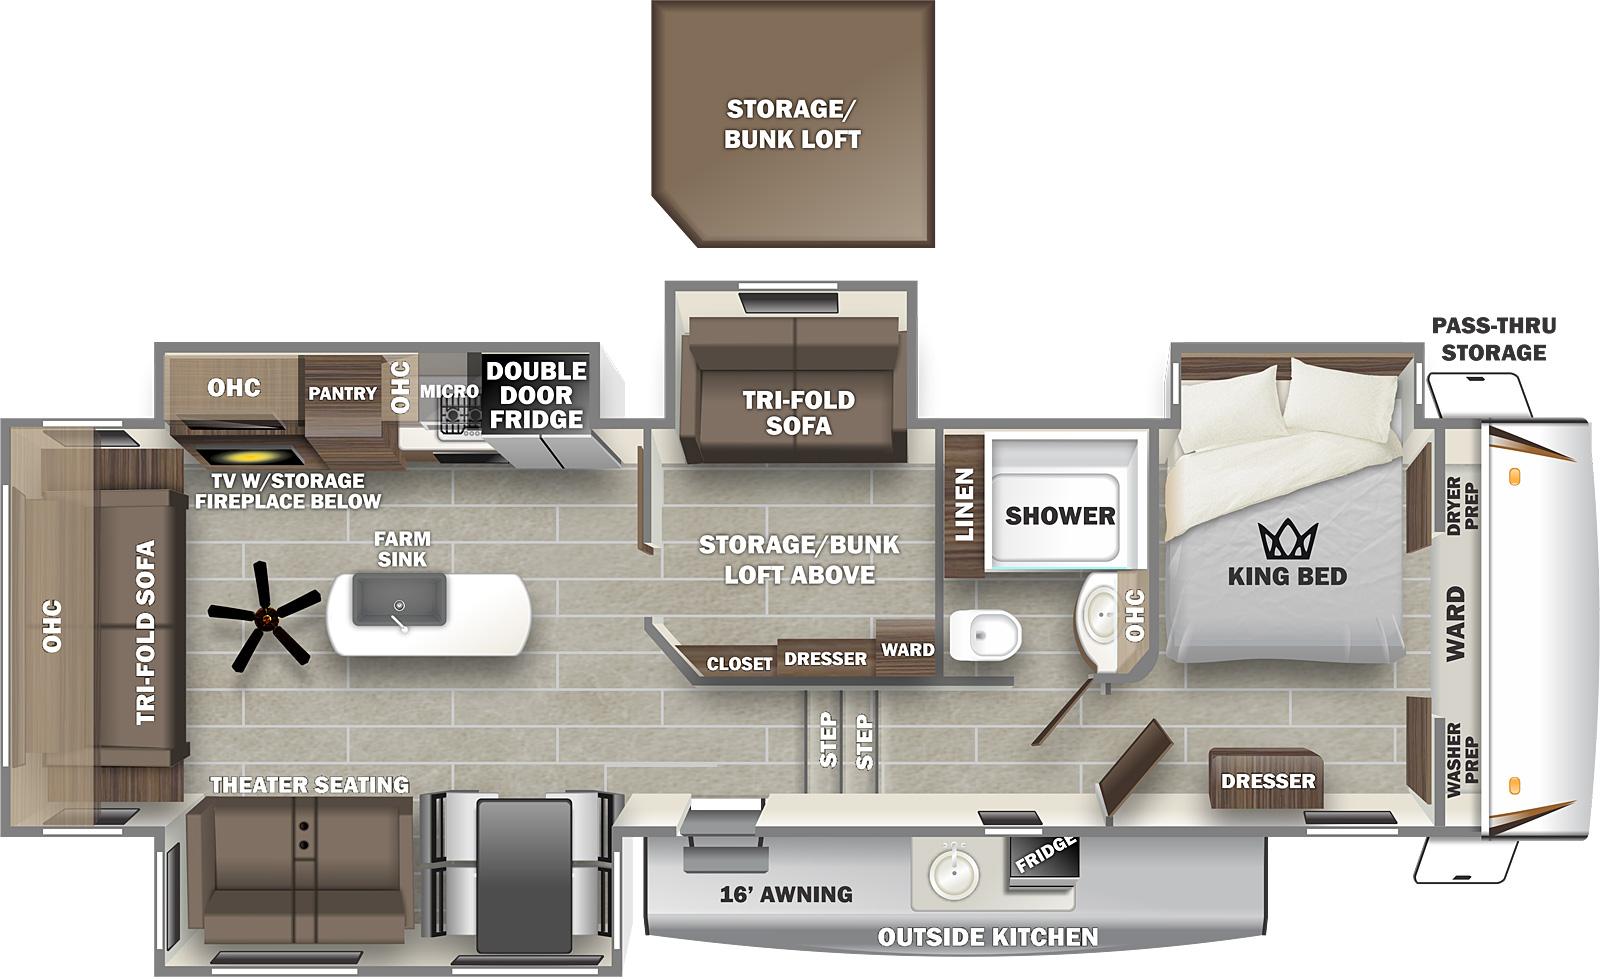 Sabre 36BHQ floorplan. The 36BHQ has 4 slide outs and one entry door.